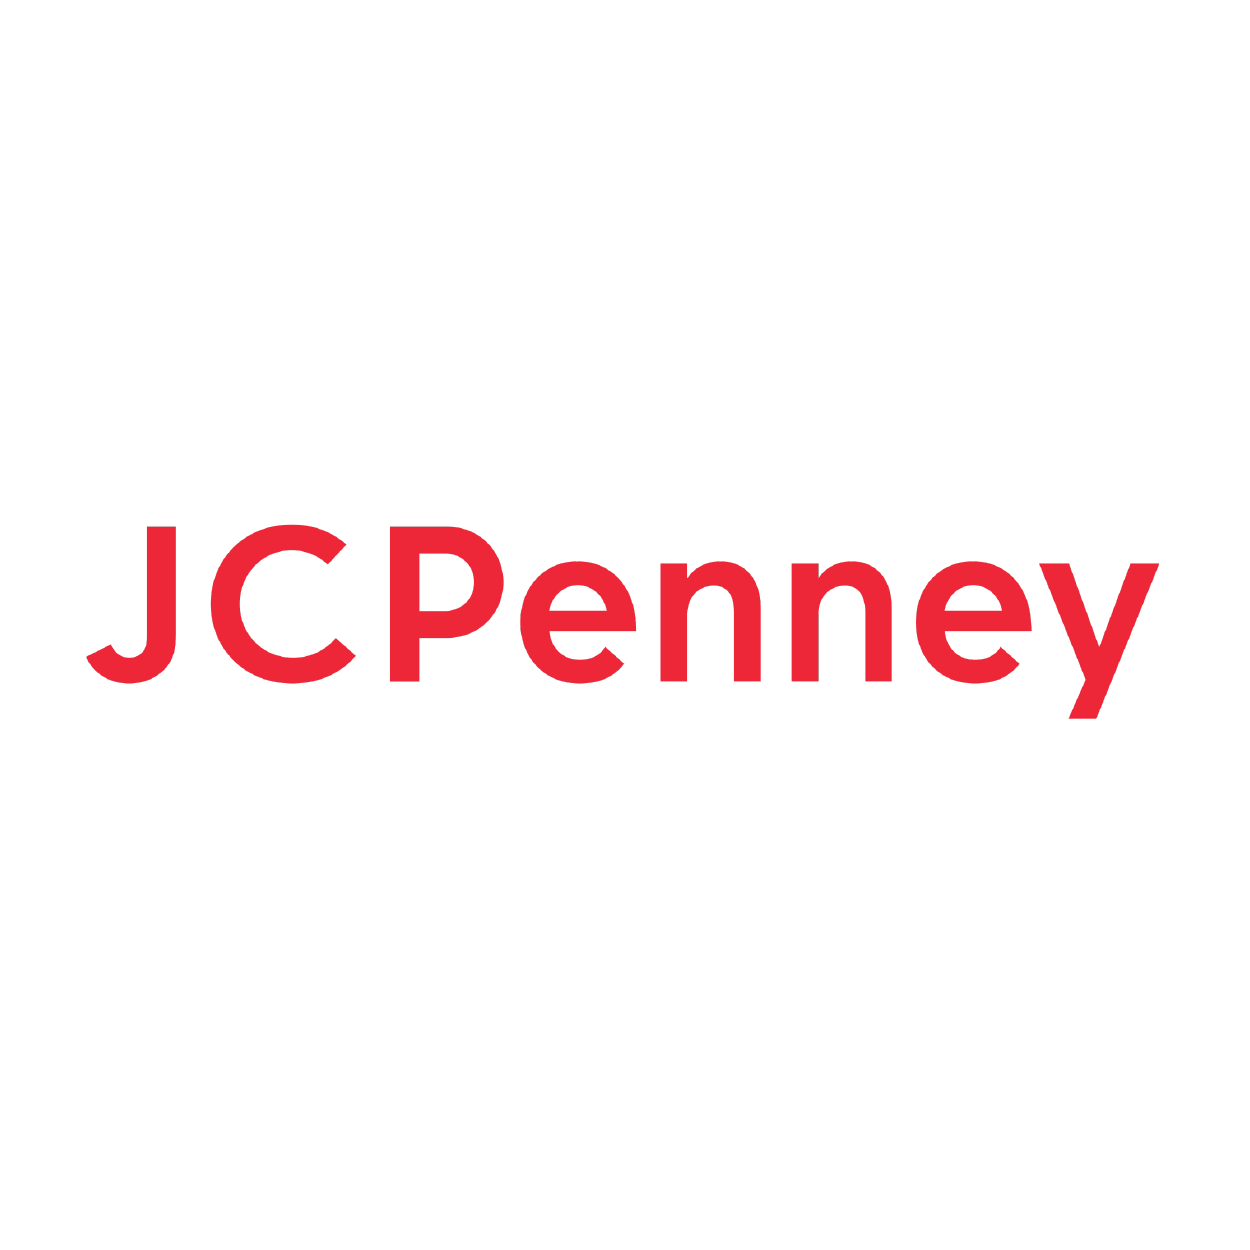 https://cal-orca.org/wp-content/uploads/2023/04/JcPenney.png